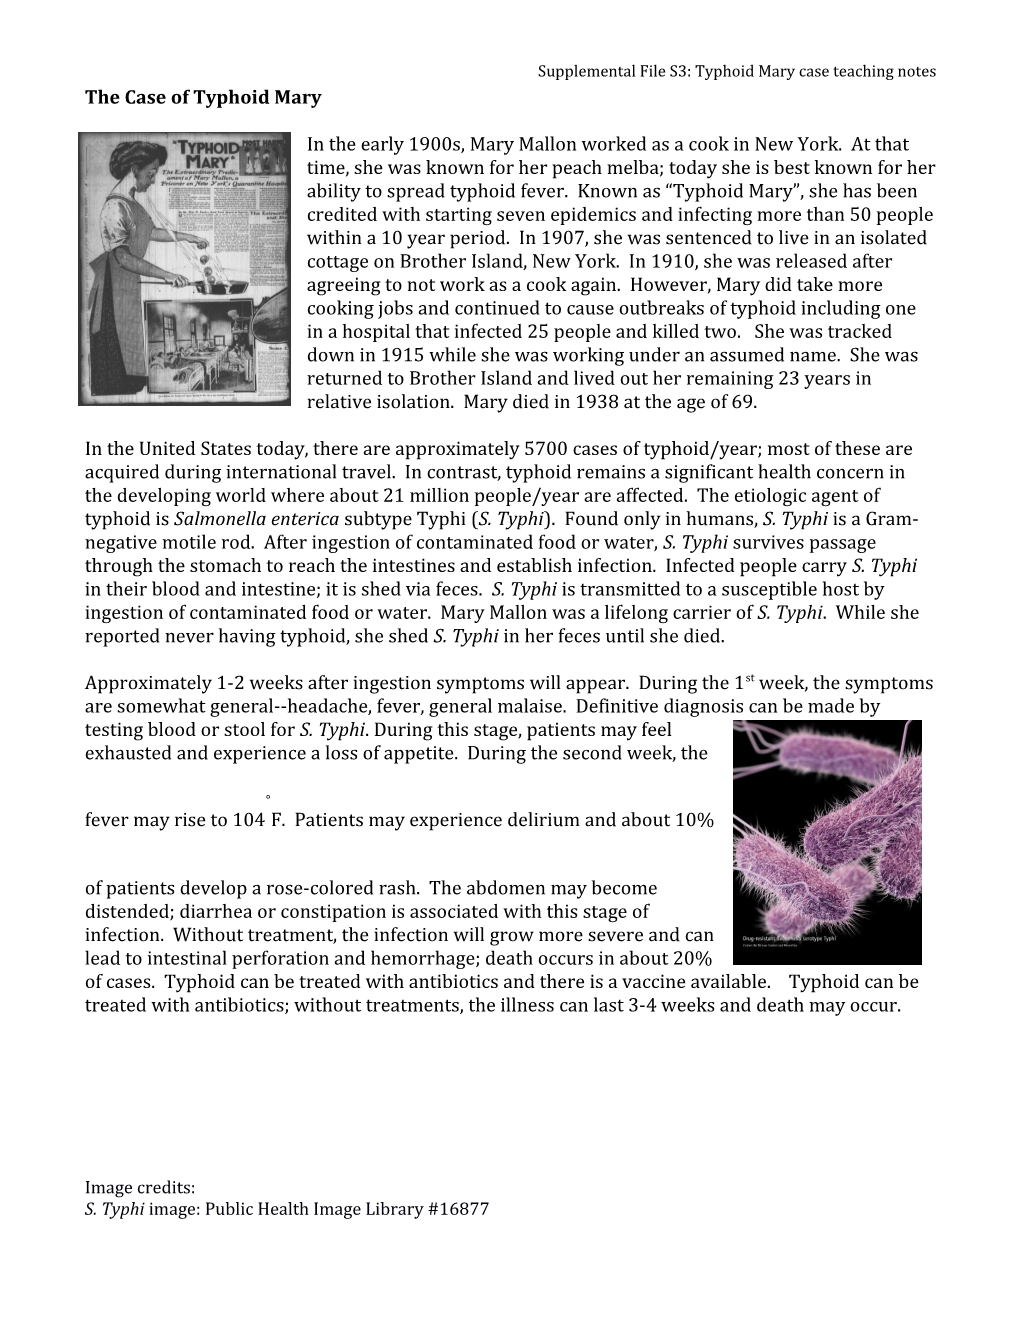 Supplemental File S3: Typhoid Mary Case Teaching Notes